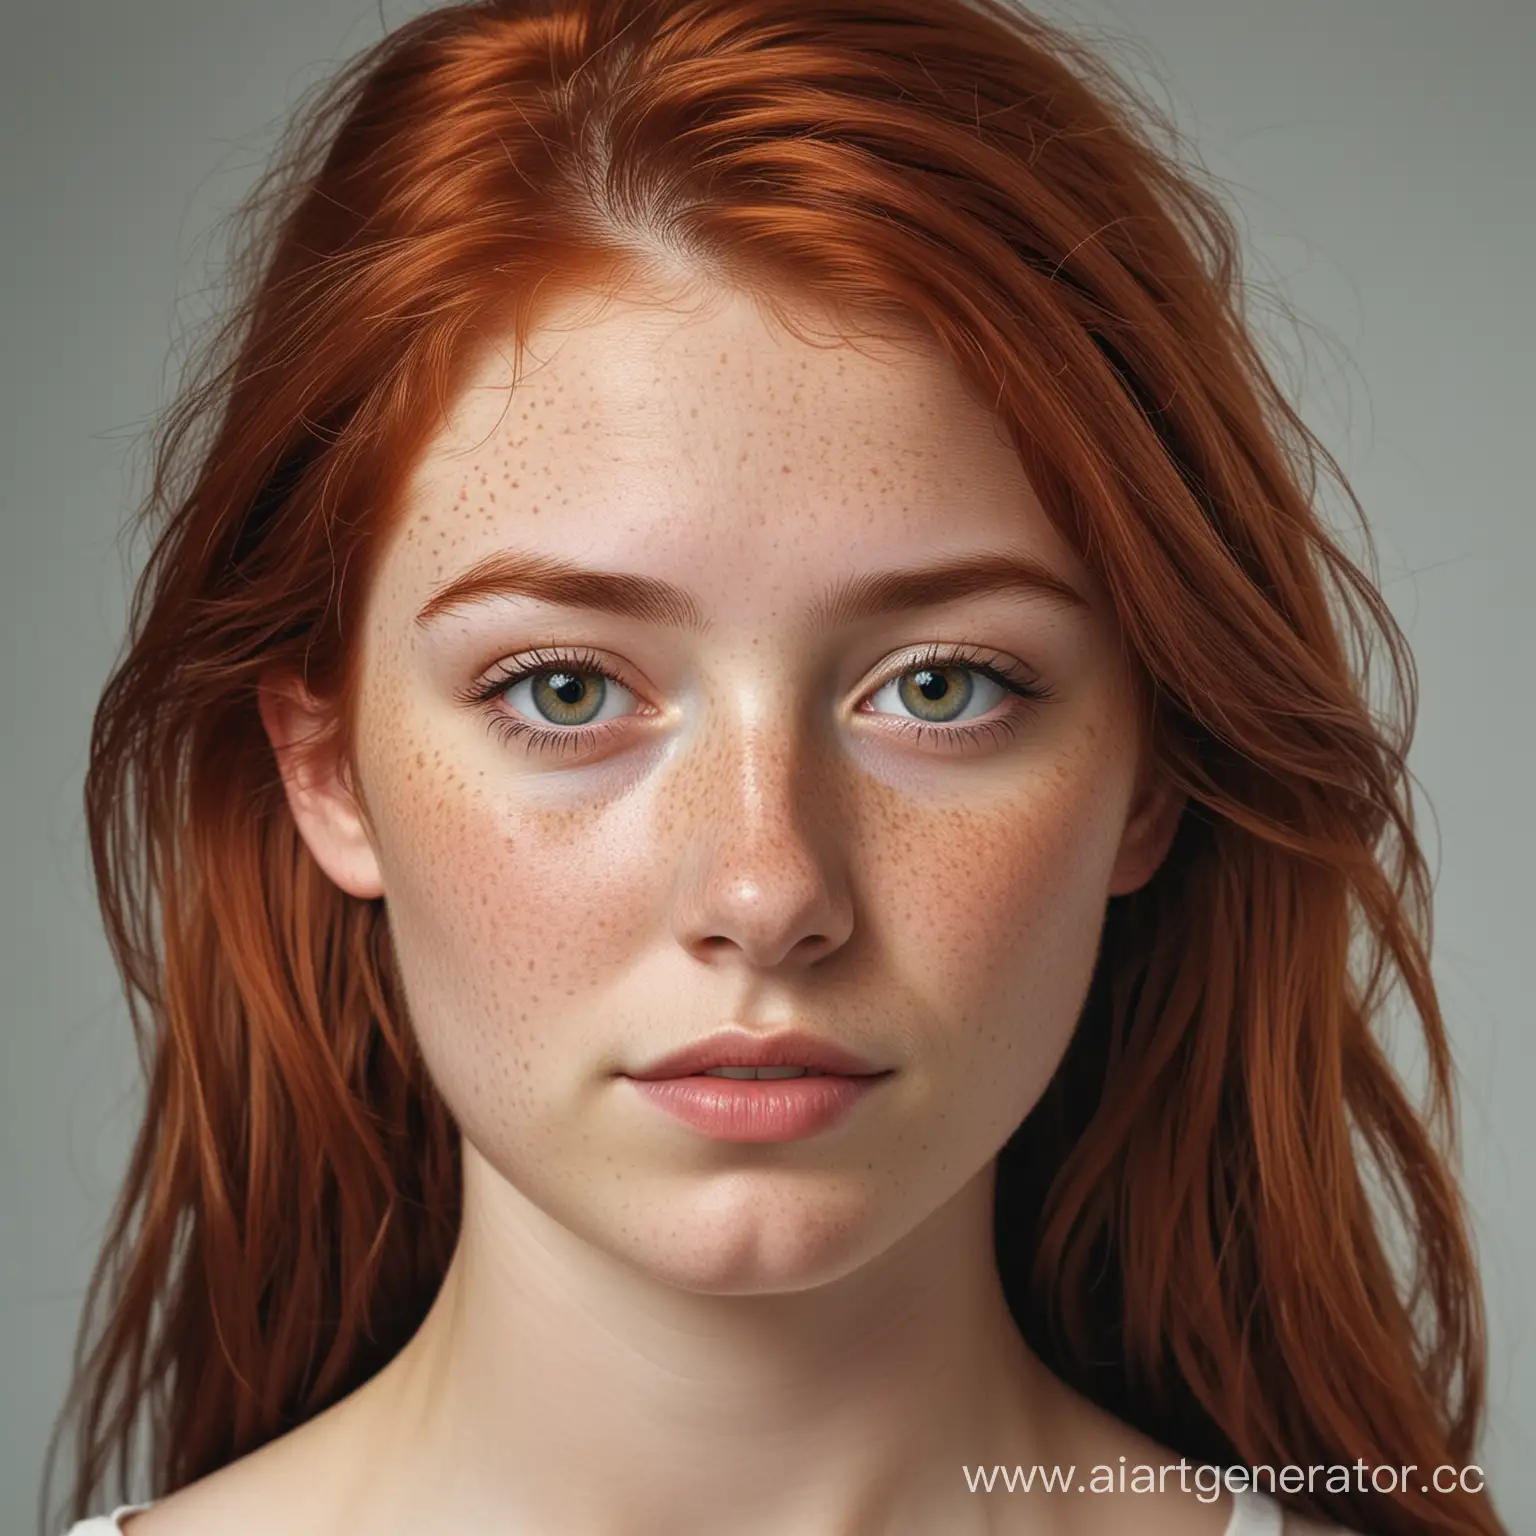 Portrait-of-a-Vibrant-17YearOld-Redhead-Girl-with-Freckles